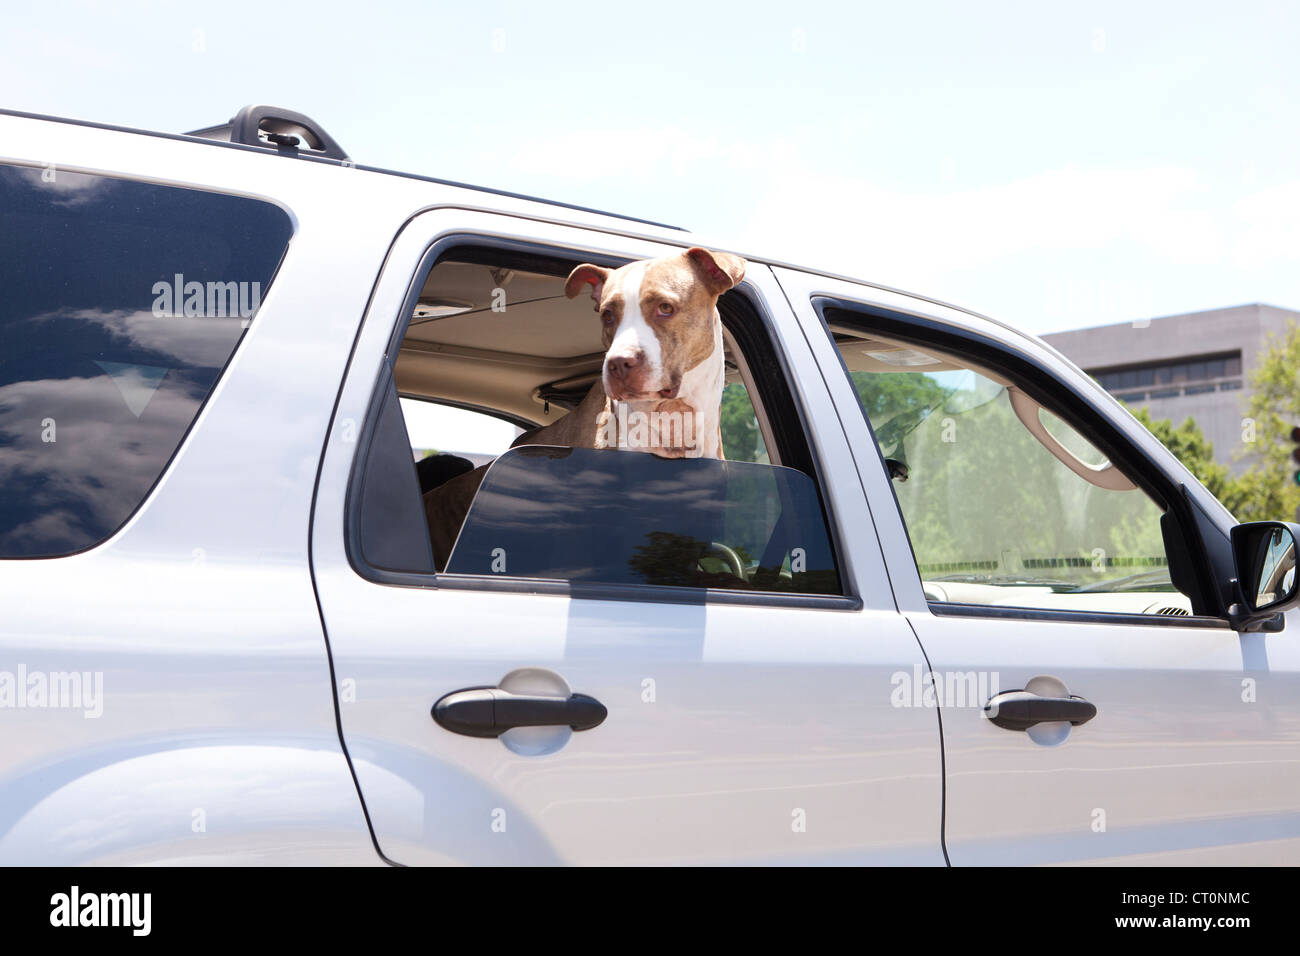 Dog leaning out of a car window Stock Photo